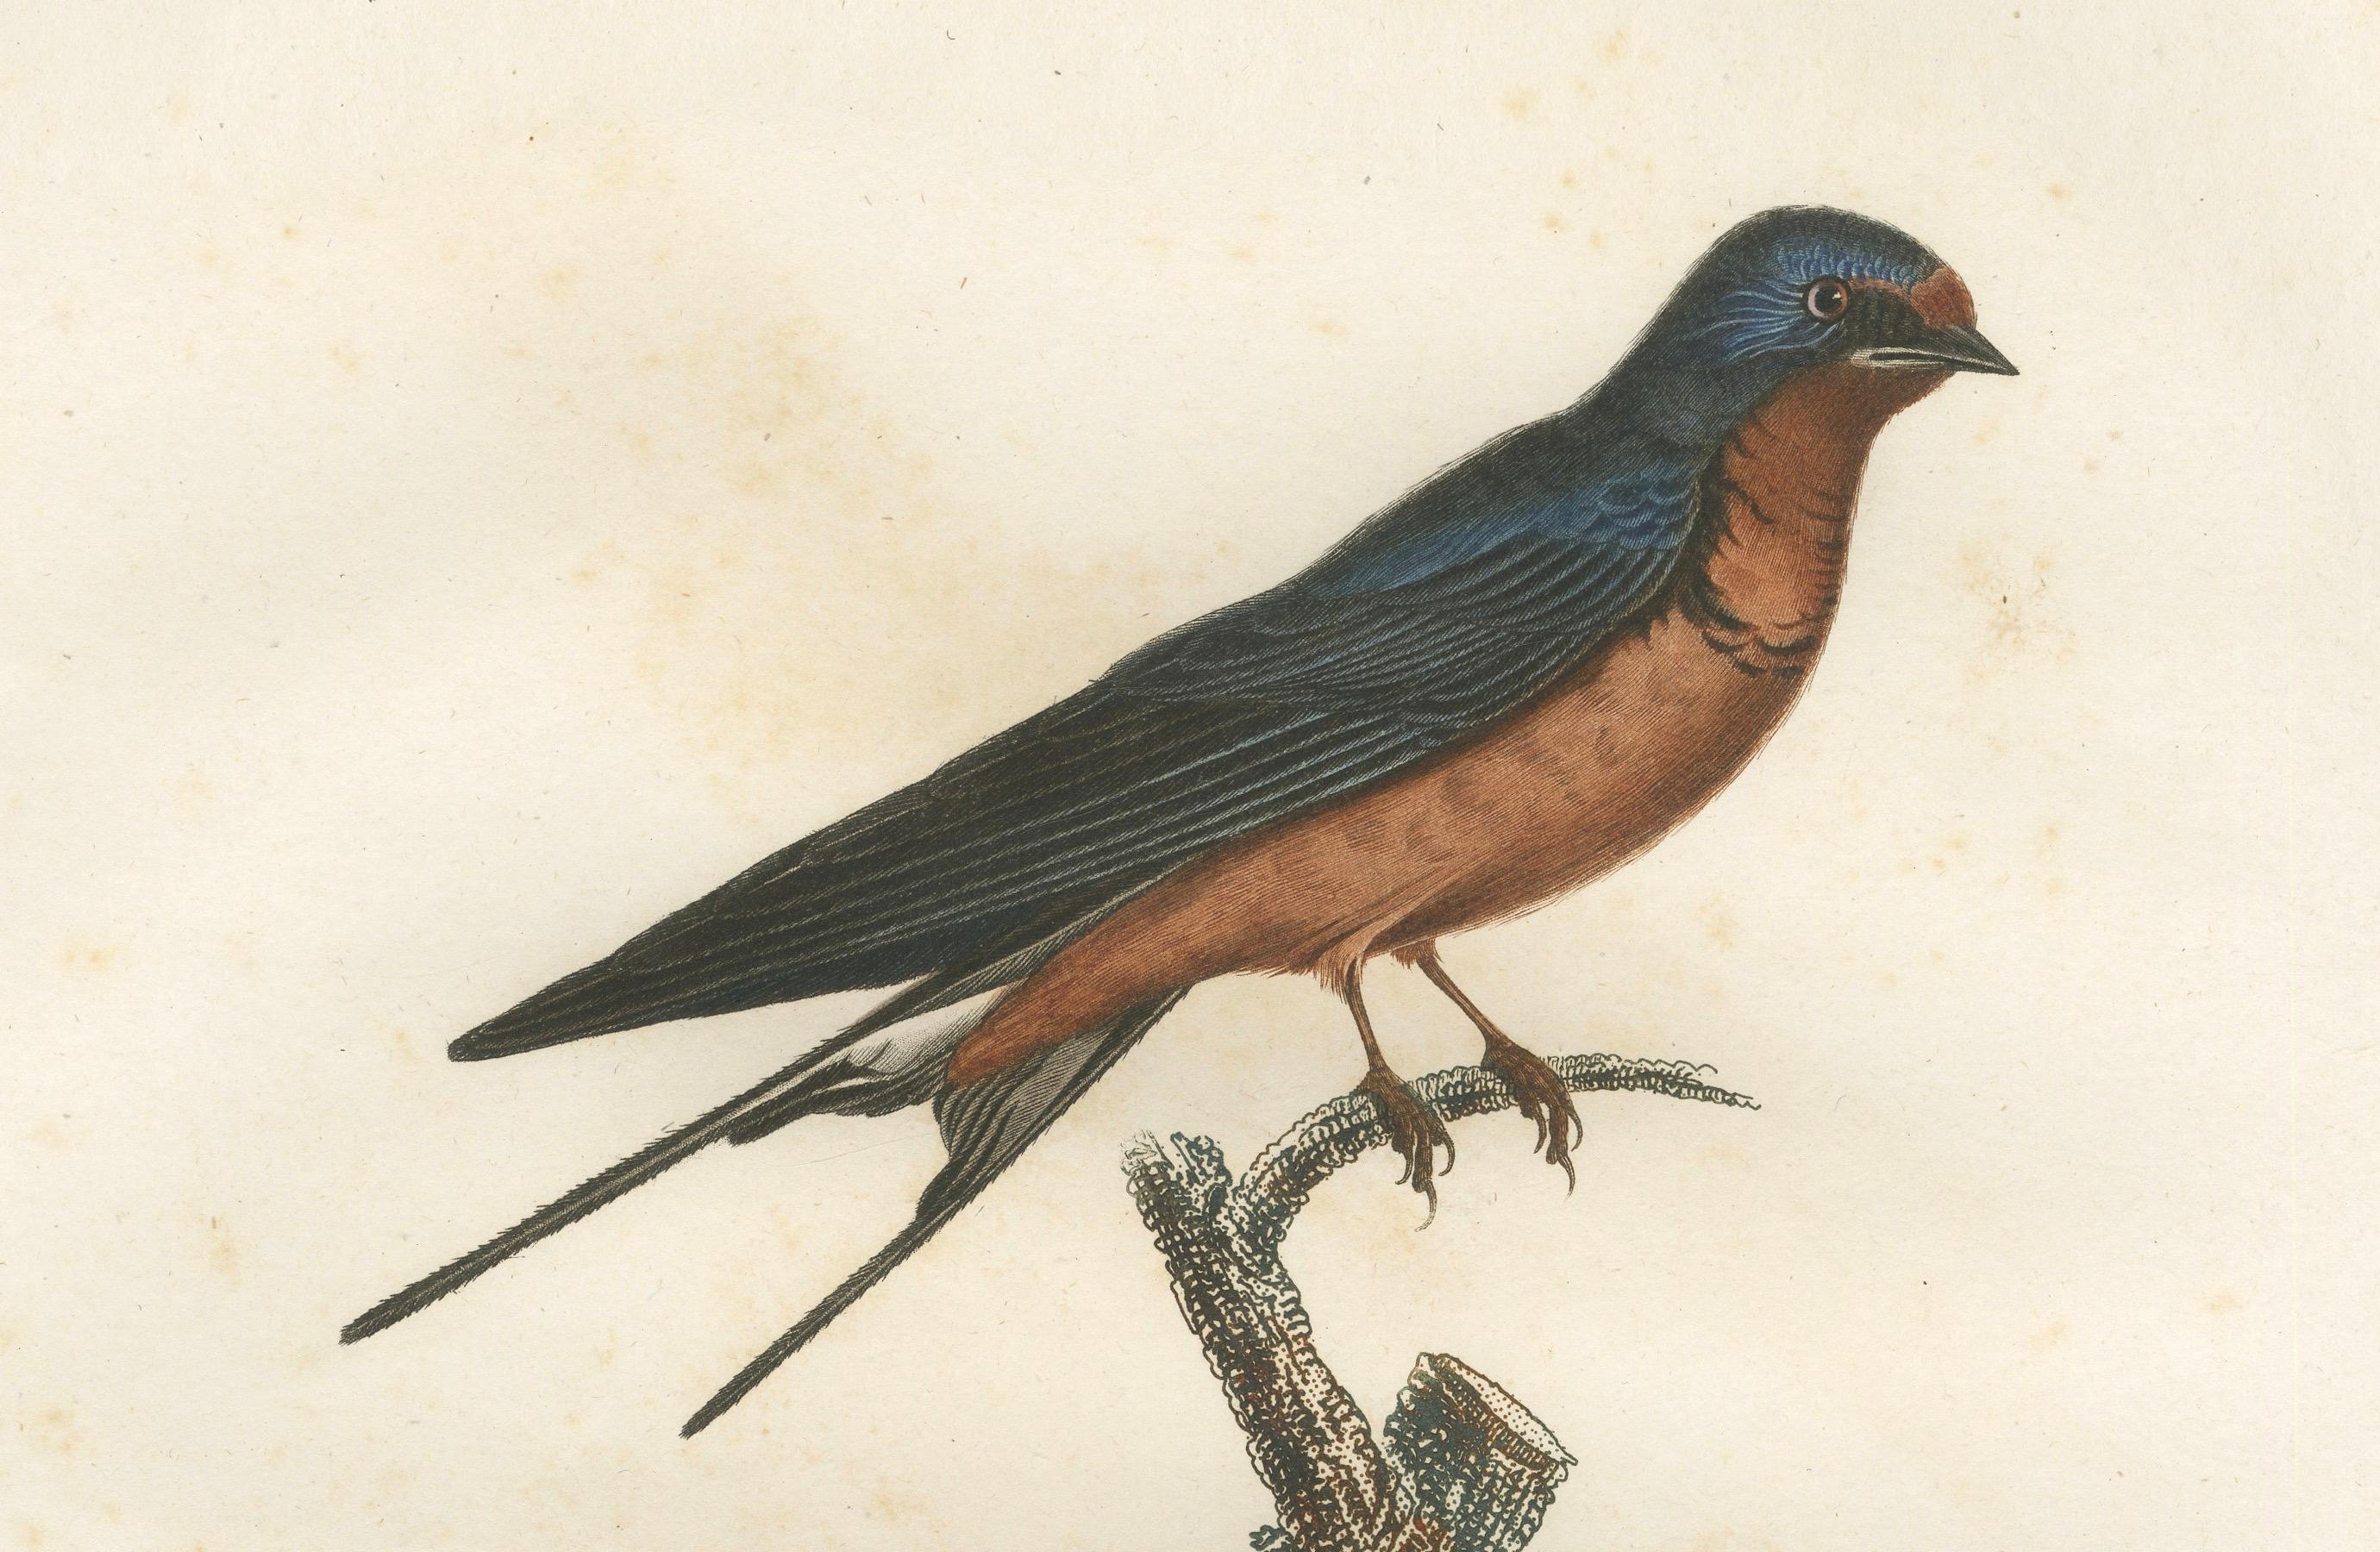 Paper 1807 Red-Breasted Swallow Illustration - Original Handcolored Antique Bird Print For Sale